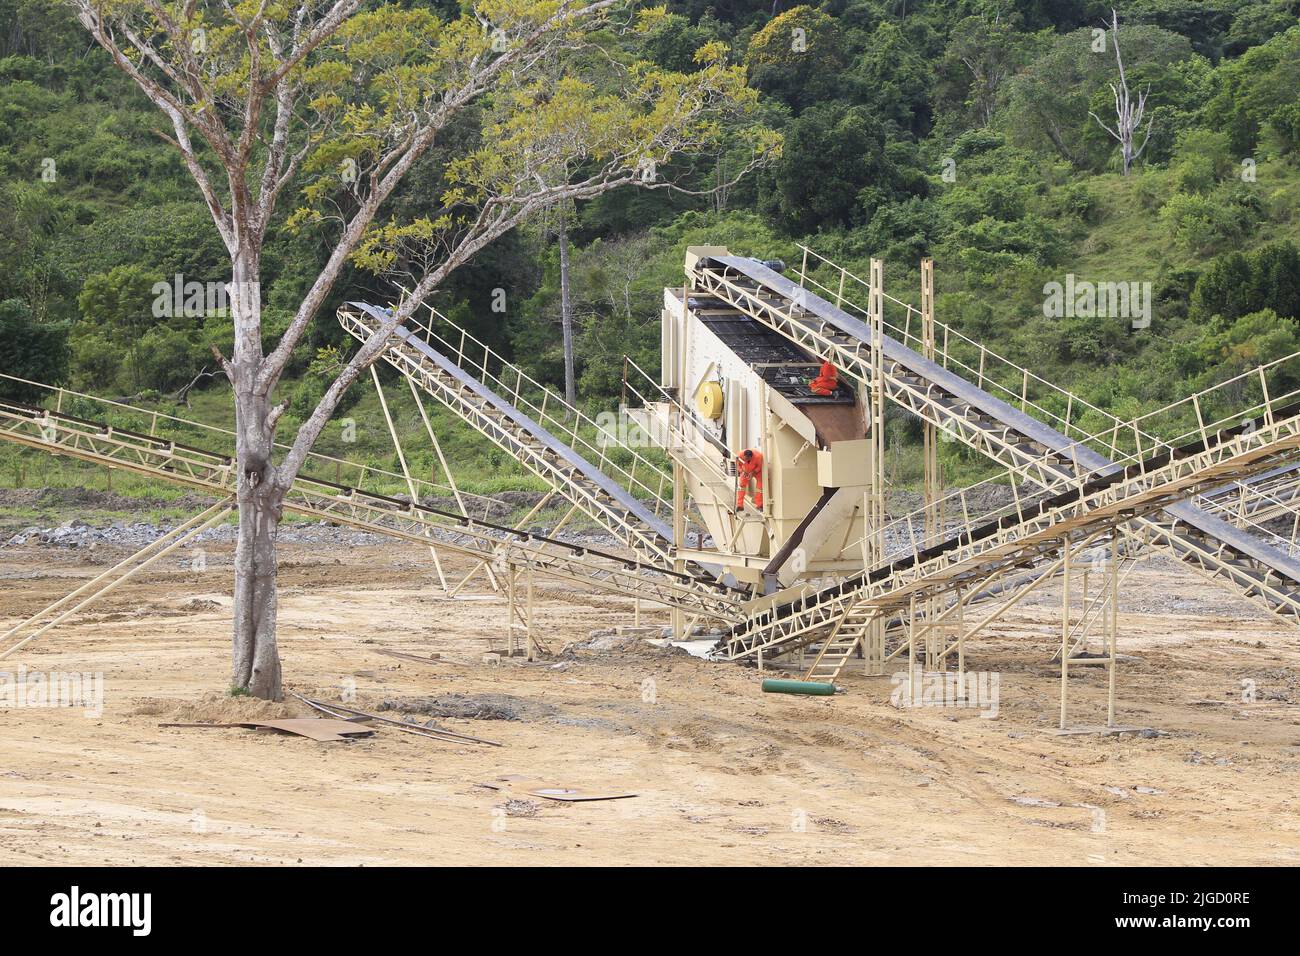 ilheus, bahia, brazil - may 23, 2022: stone crushing machine for gravel production at a construction site in the city of Ilheus. Stock Photo